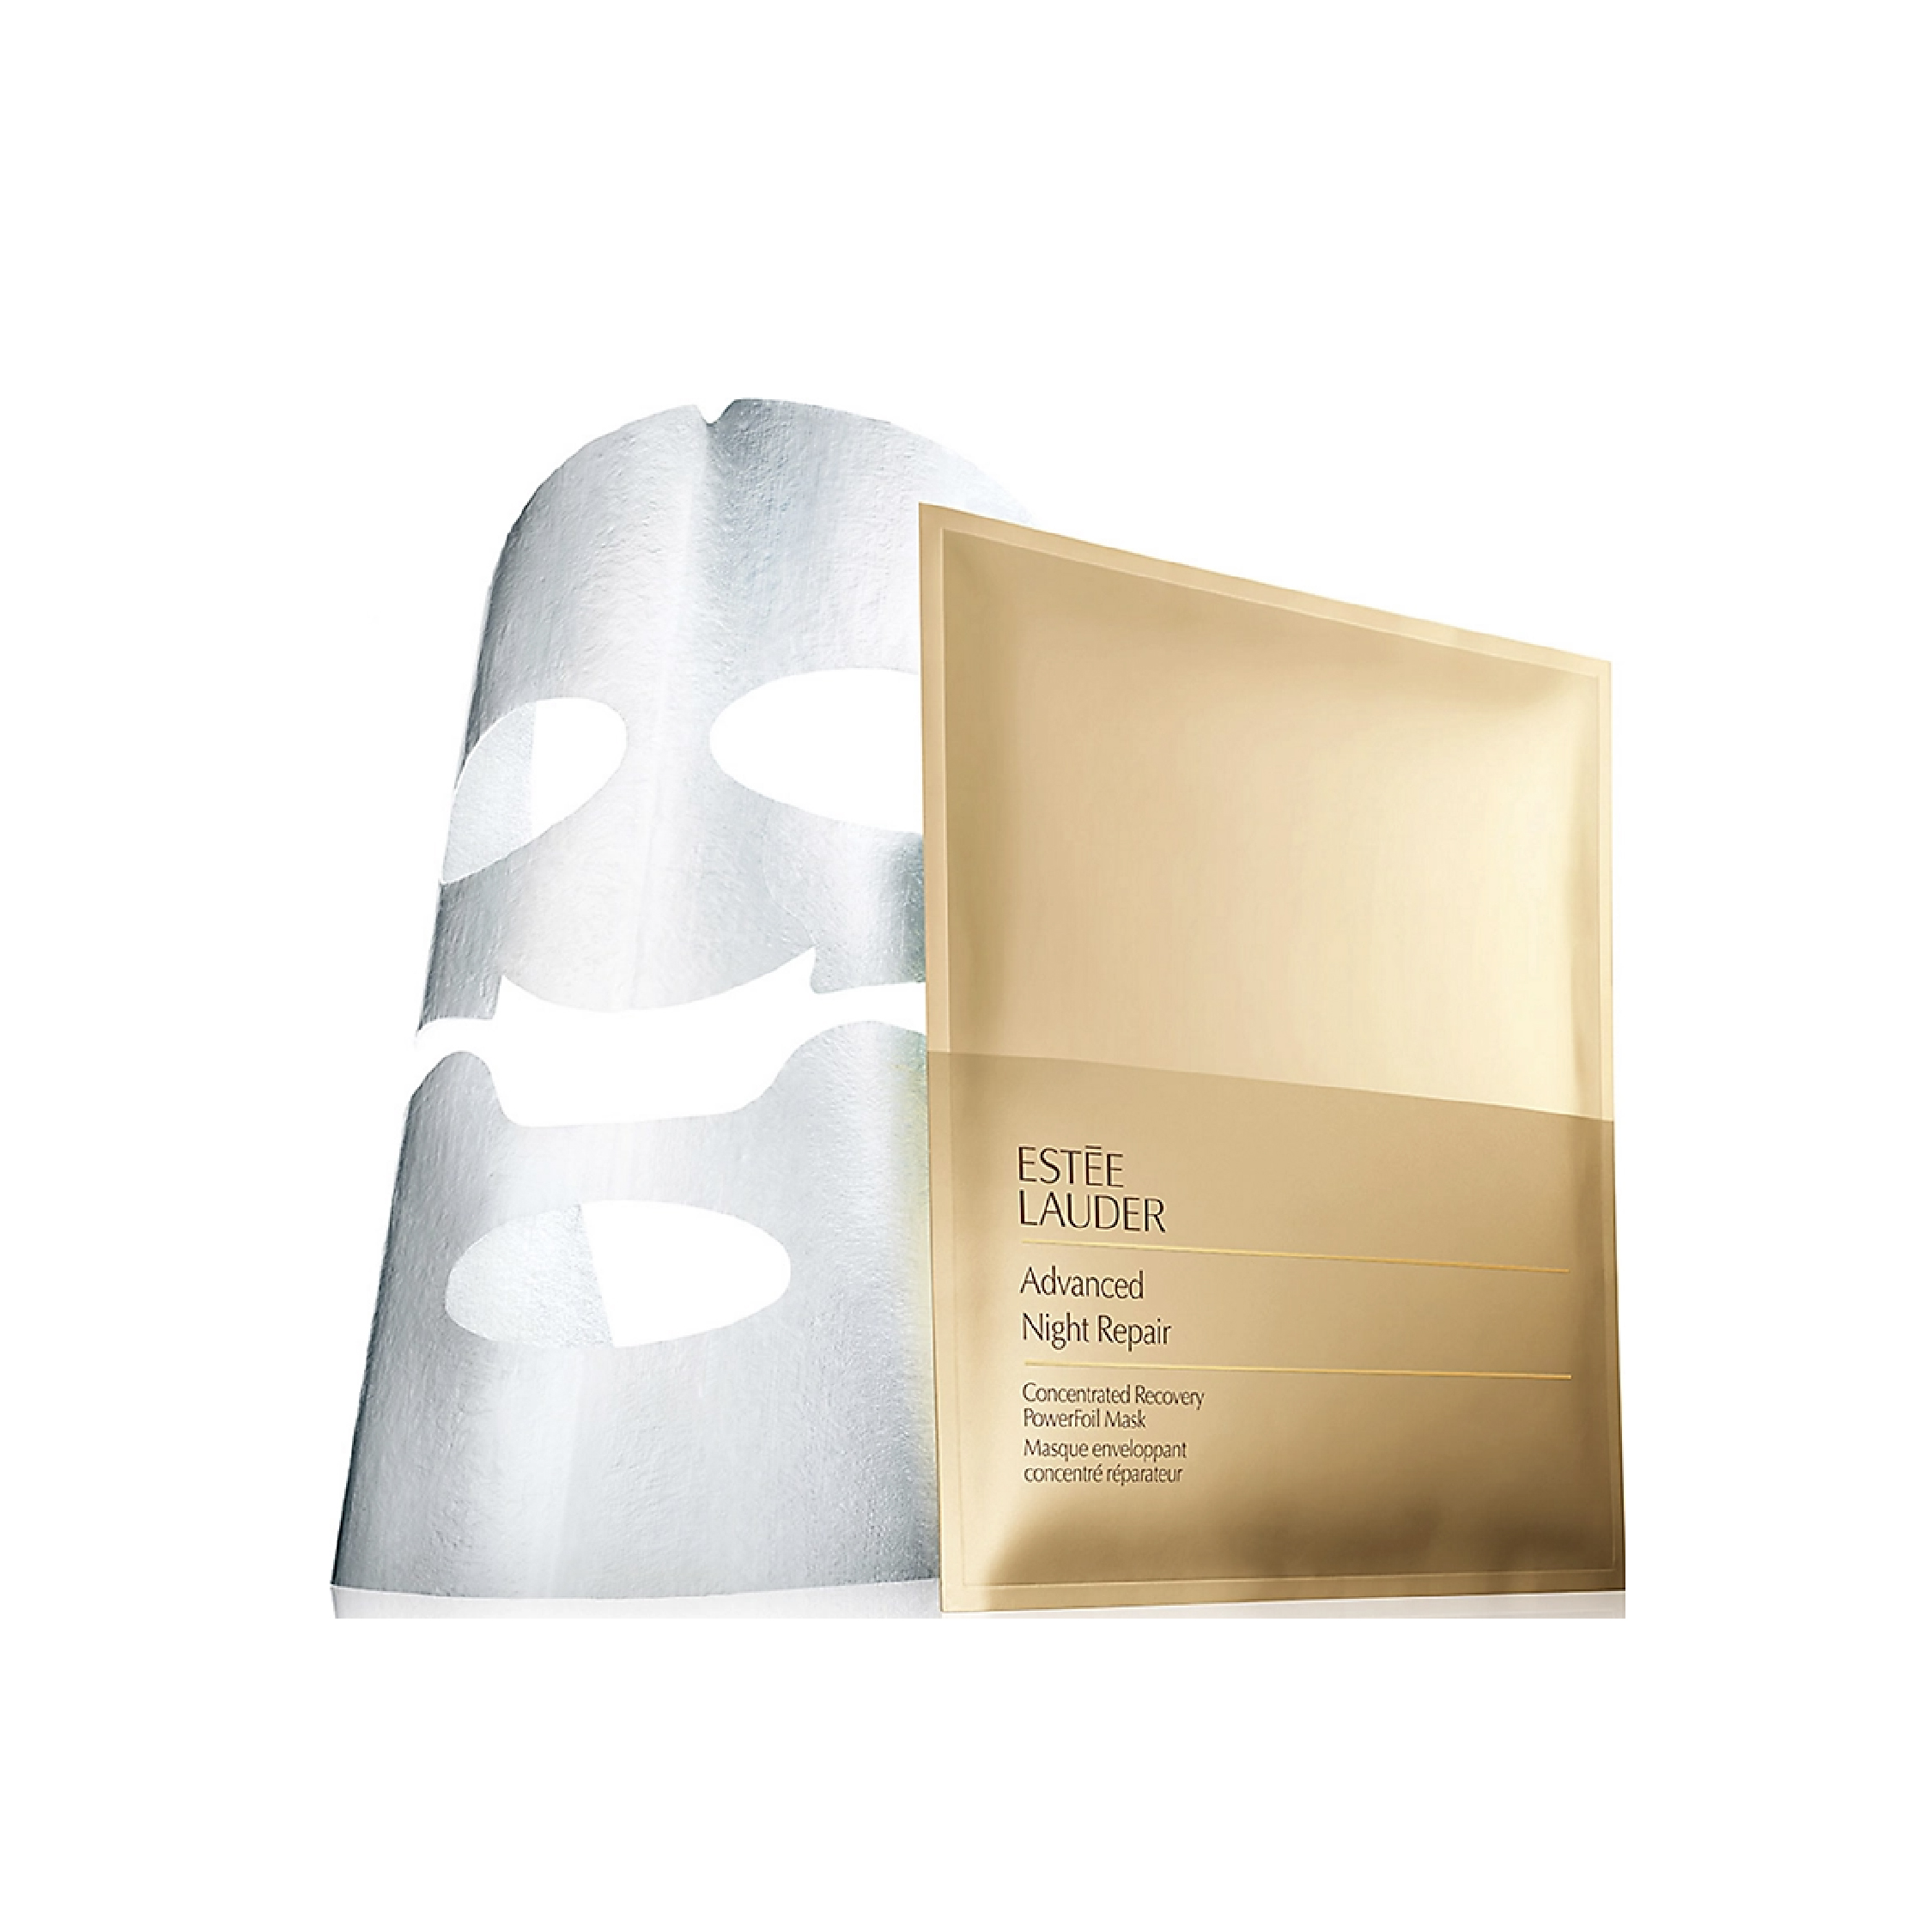 Estee lauder advanced night repair concentrated recovery powerfoil mask